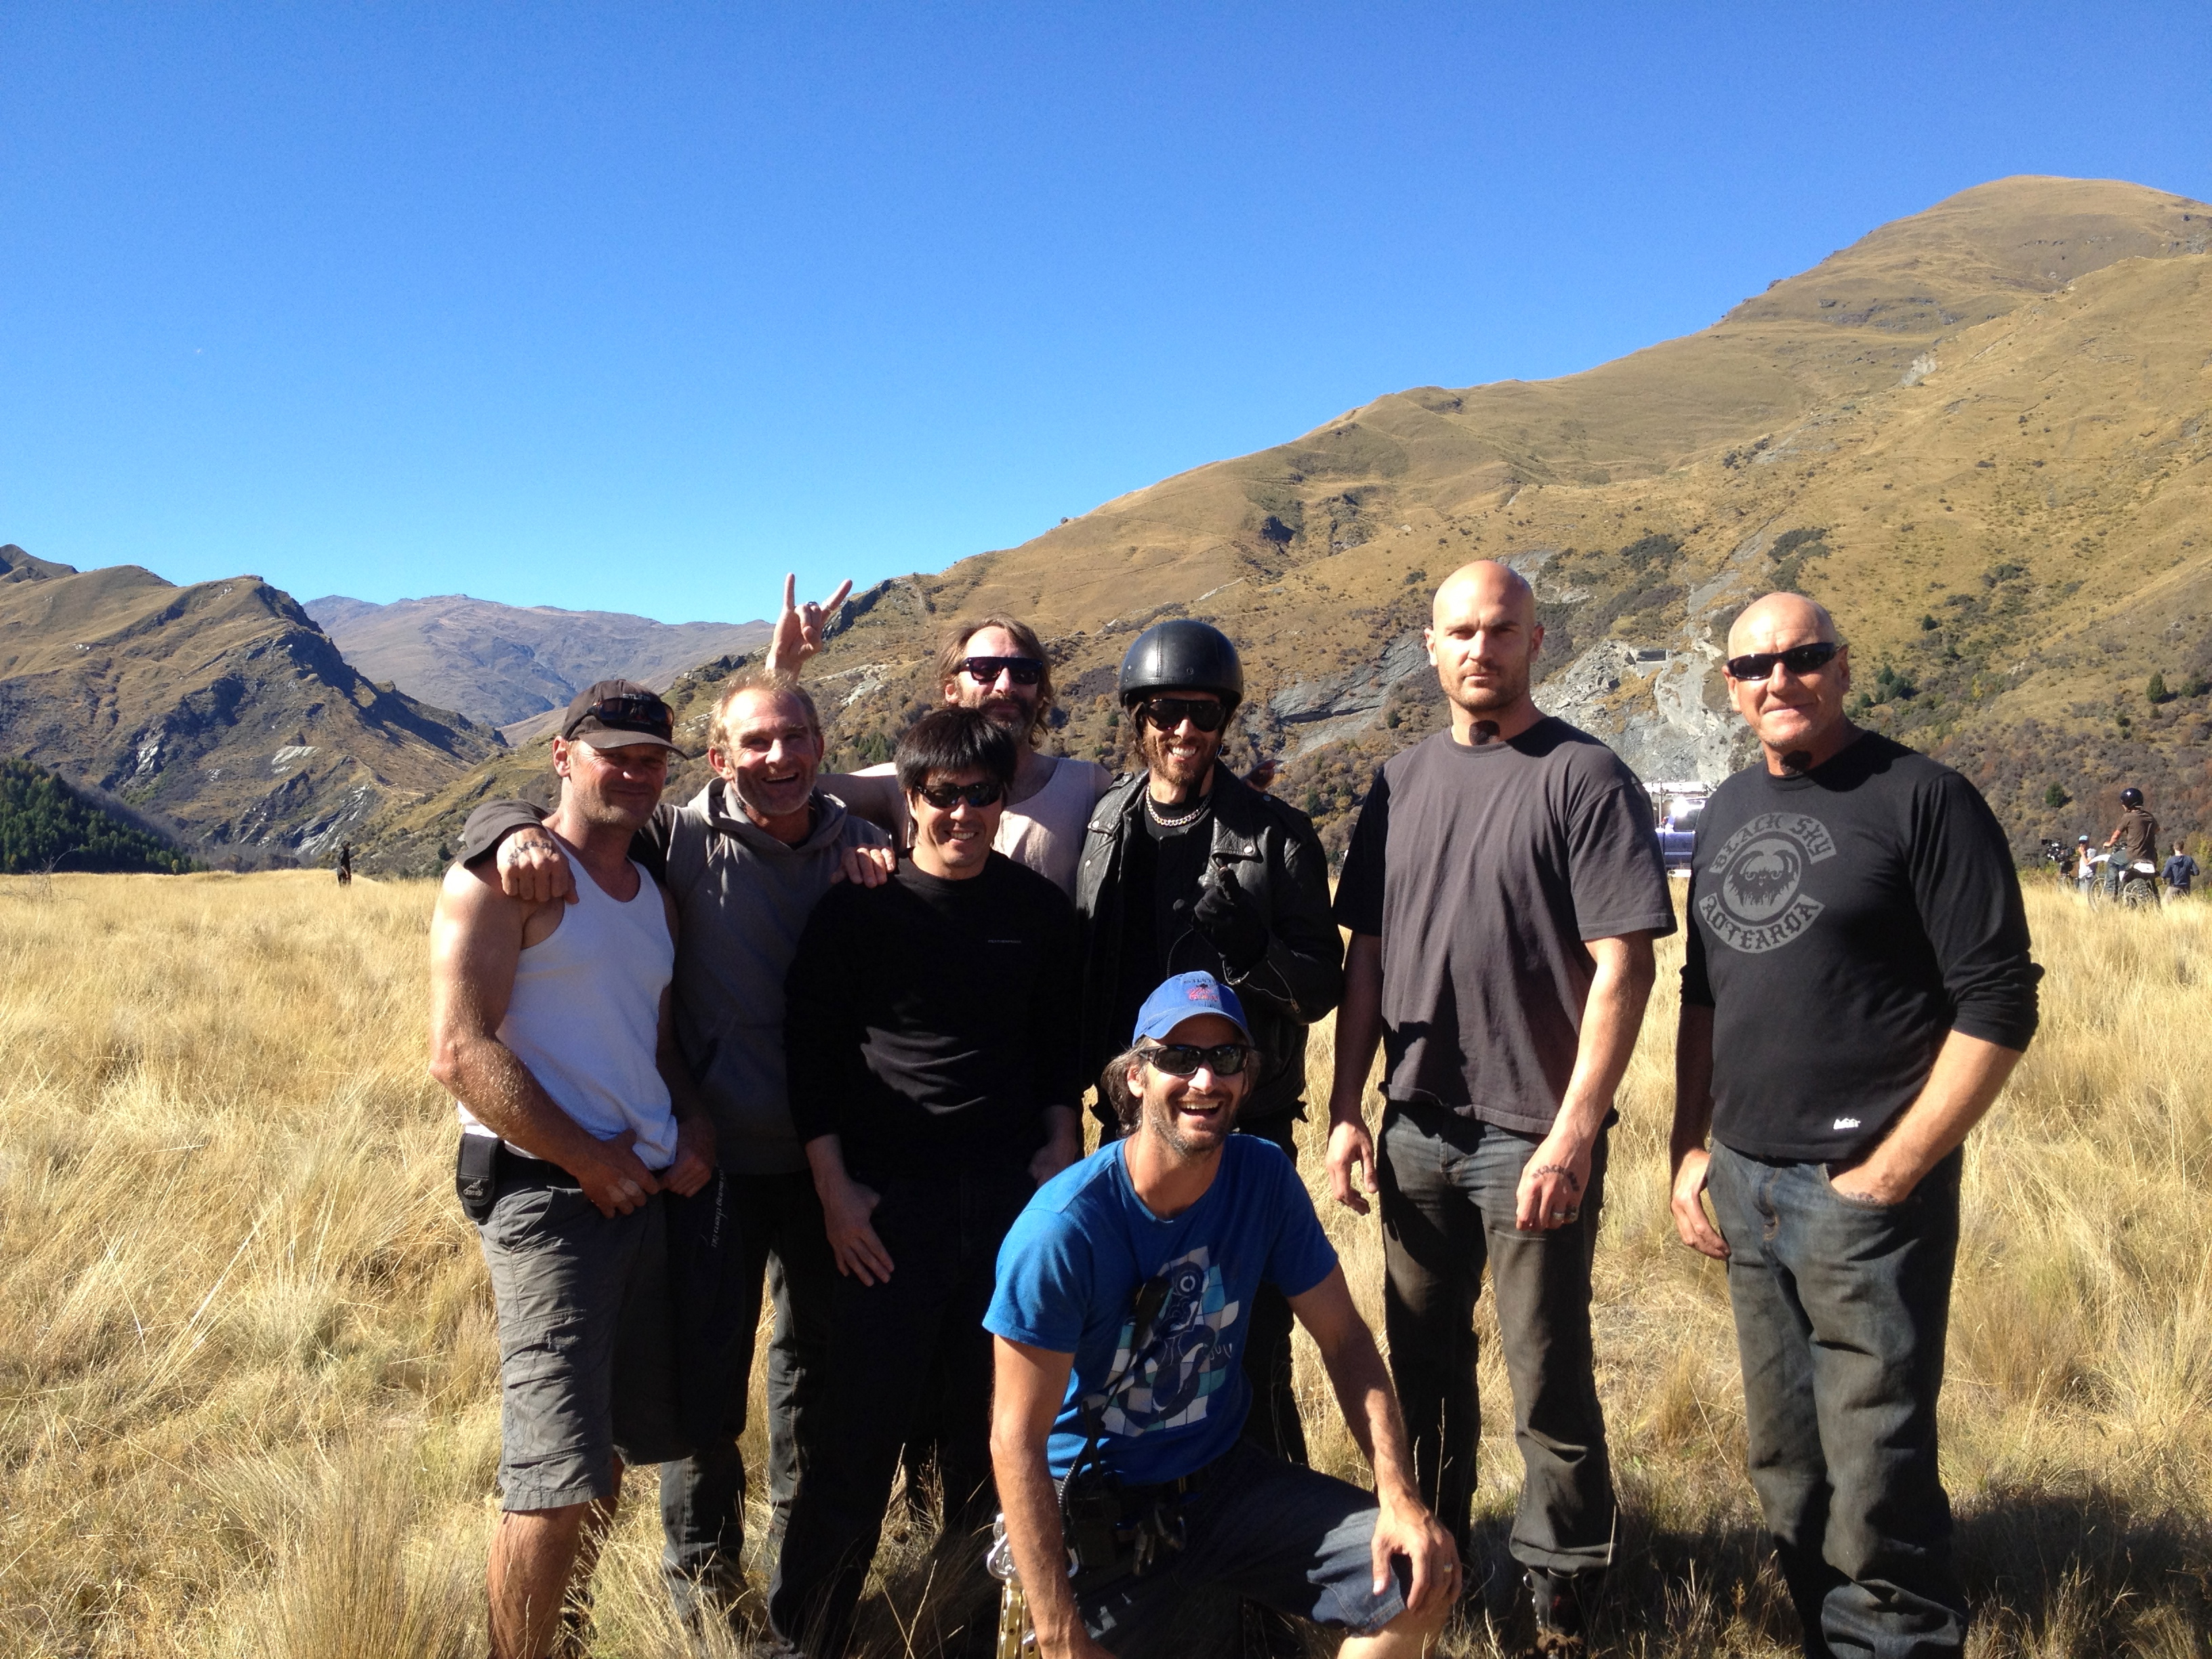 My boys on location for Top of the Lake. Awesome team and awesome times in beautiful Queenstown